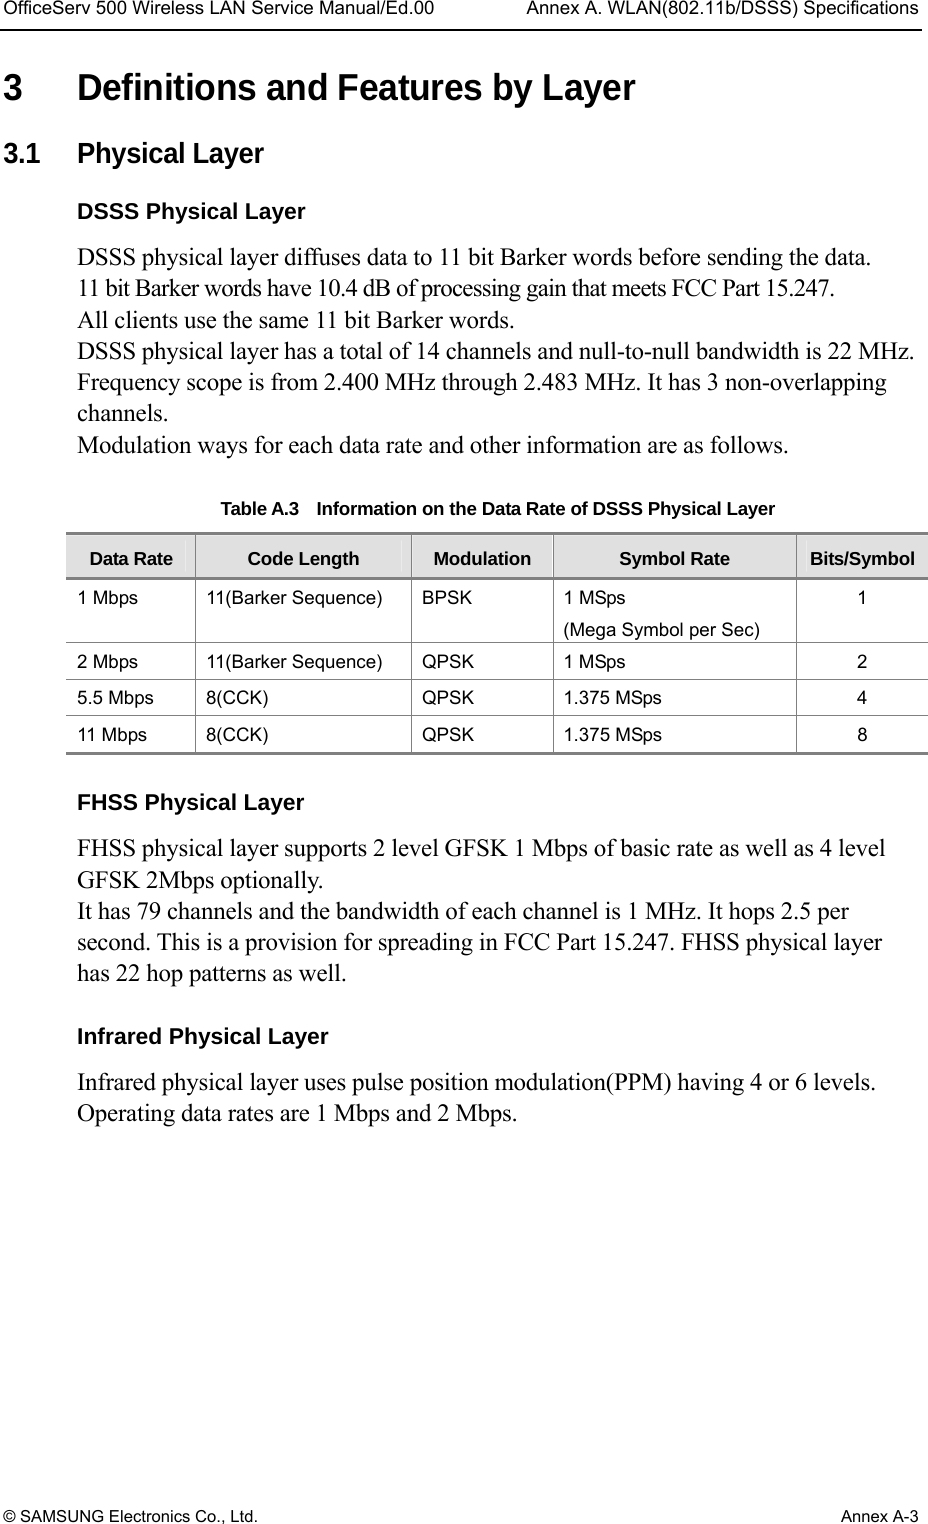 OfficeServ 500 Wireless LAN Service Manual/Ed.00  Annex A. WLAN(802.11b/DSSS) Specifications © SAMSUNG Electronics Co., Ltd.  Annex A-3 3  Definitions and Features by Layer 3.1 Physical Layer DSSS Physical Layer DSSS physical layer diffuses data to 11 bit Barker words before sending the data.   11 bit Barker words have 10.4 dB of processing gain that meets FCC Part 15.247.   All clients use the same 11 bit Barker words. DSSS physical layer has a total of 14 channels and null-to-null bandwidth is 22 MHz. Frequency scope is from 2.400 MHz through 2.483 MHz. It has 3 non-overlapping channels. Modulation ways for each data rate and other information are as follows.   Table A.3    Information on the Data Rate of DSSS Physical Layer Data Rate  Code Length  Modulation  Symbol Rate  Bits/Symbol1 Mbps   11(Barker Sequence)   BPSK   1 MSps (Mega Symbol per Sec) 1 2 Mbps   11(Barker Sequence)   QPSK   1 MSps   2 5.5 Mbps   8(CCK)   QPSK   1.375 MSps  4 11 Mbps   8(CCK)   QPSK   1.375 MSps  8  FHSS Physical Layer  FHSS physical layer supports 2 level GFSK 1 Mbps of basic rate as well as 4 level GFSK 2Mbps optionally. It has 79 channels and the bandwidth of each channel is 1 MHz. It hops 2.5 per second. This is a provision for spreading in FCC Part 15.247. FHSS physical layer has 22 hop patterns as well.  Infrared Physical Layer  Infrared physical layer uses pulse position modulation(PPM) having 4 or 6 levels. Operating data rates are 1 Mbps and 2 Mbps.   